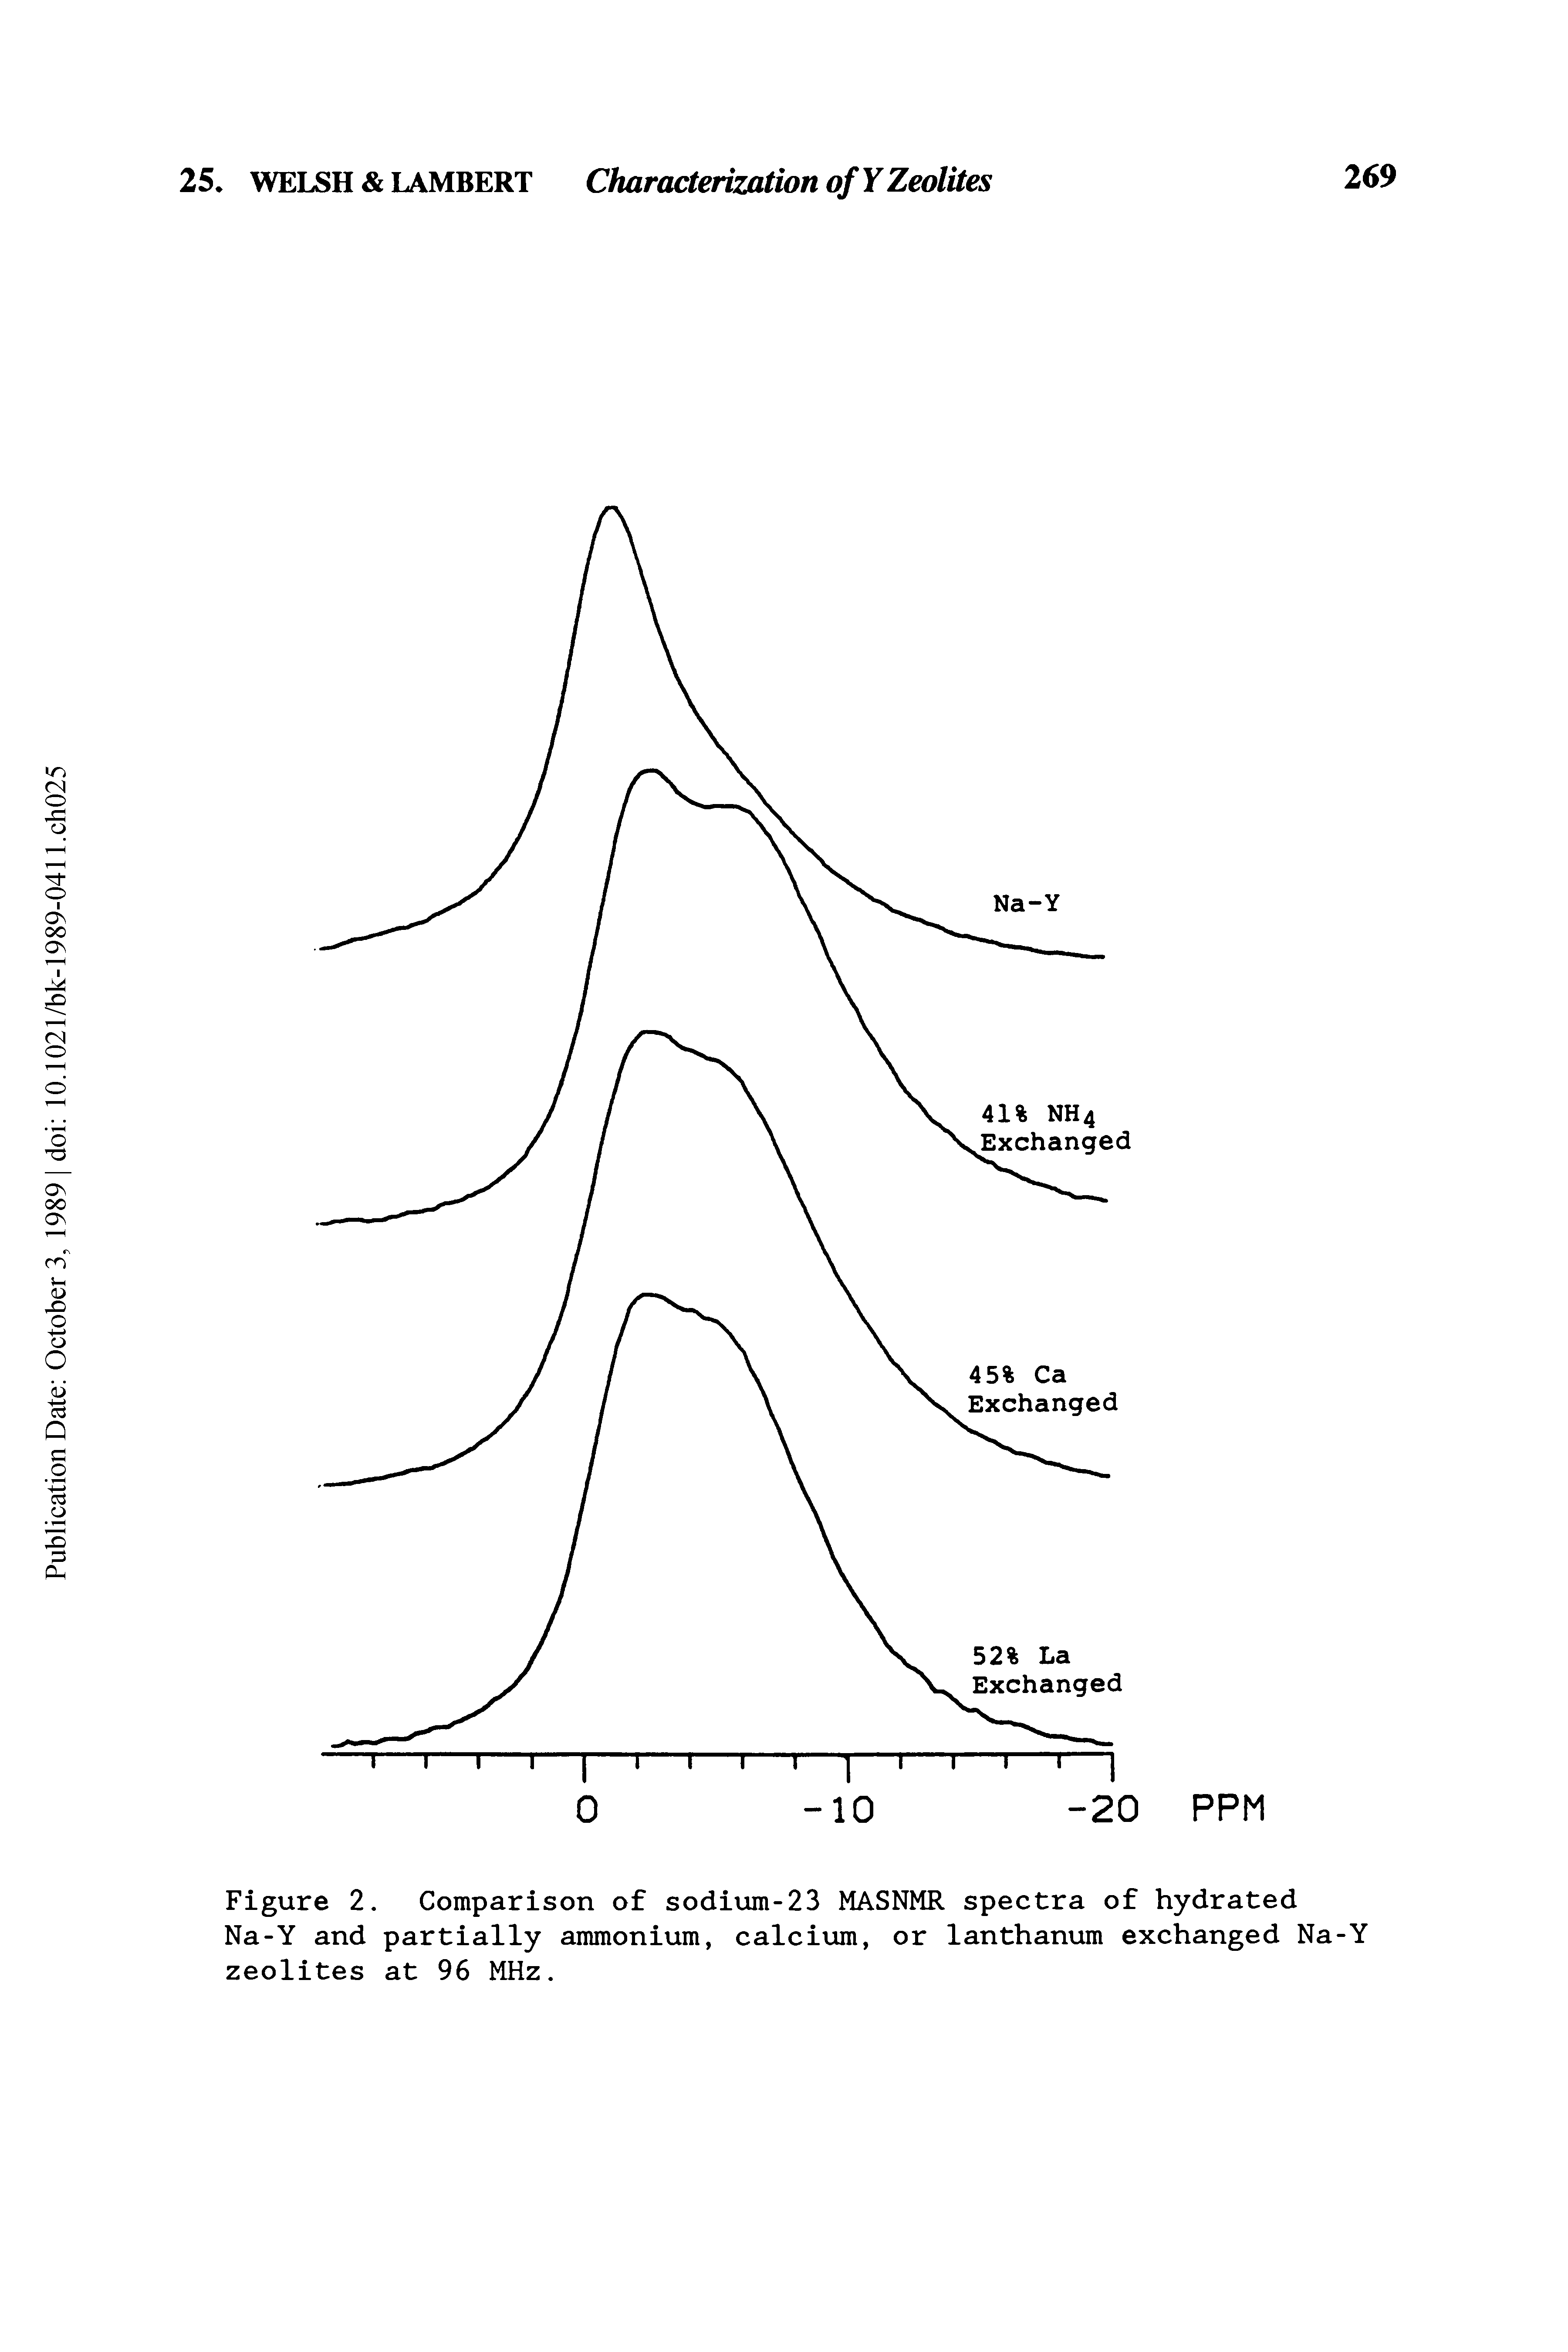 Figure 2. Comparison of sodium-23 MASNMR spectra of hydrated Na-Y and partially ammonium, calcium, or lanthanum exchanged Na-Y zeolites at 96 MHz.